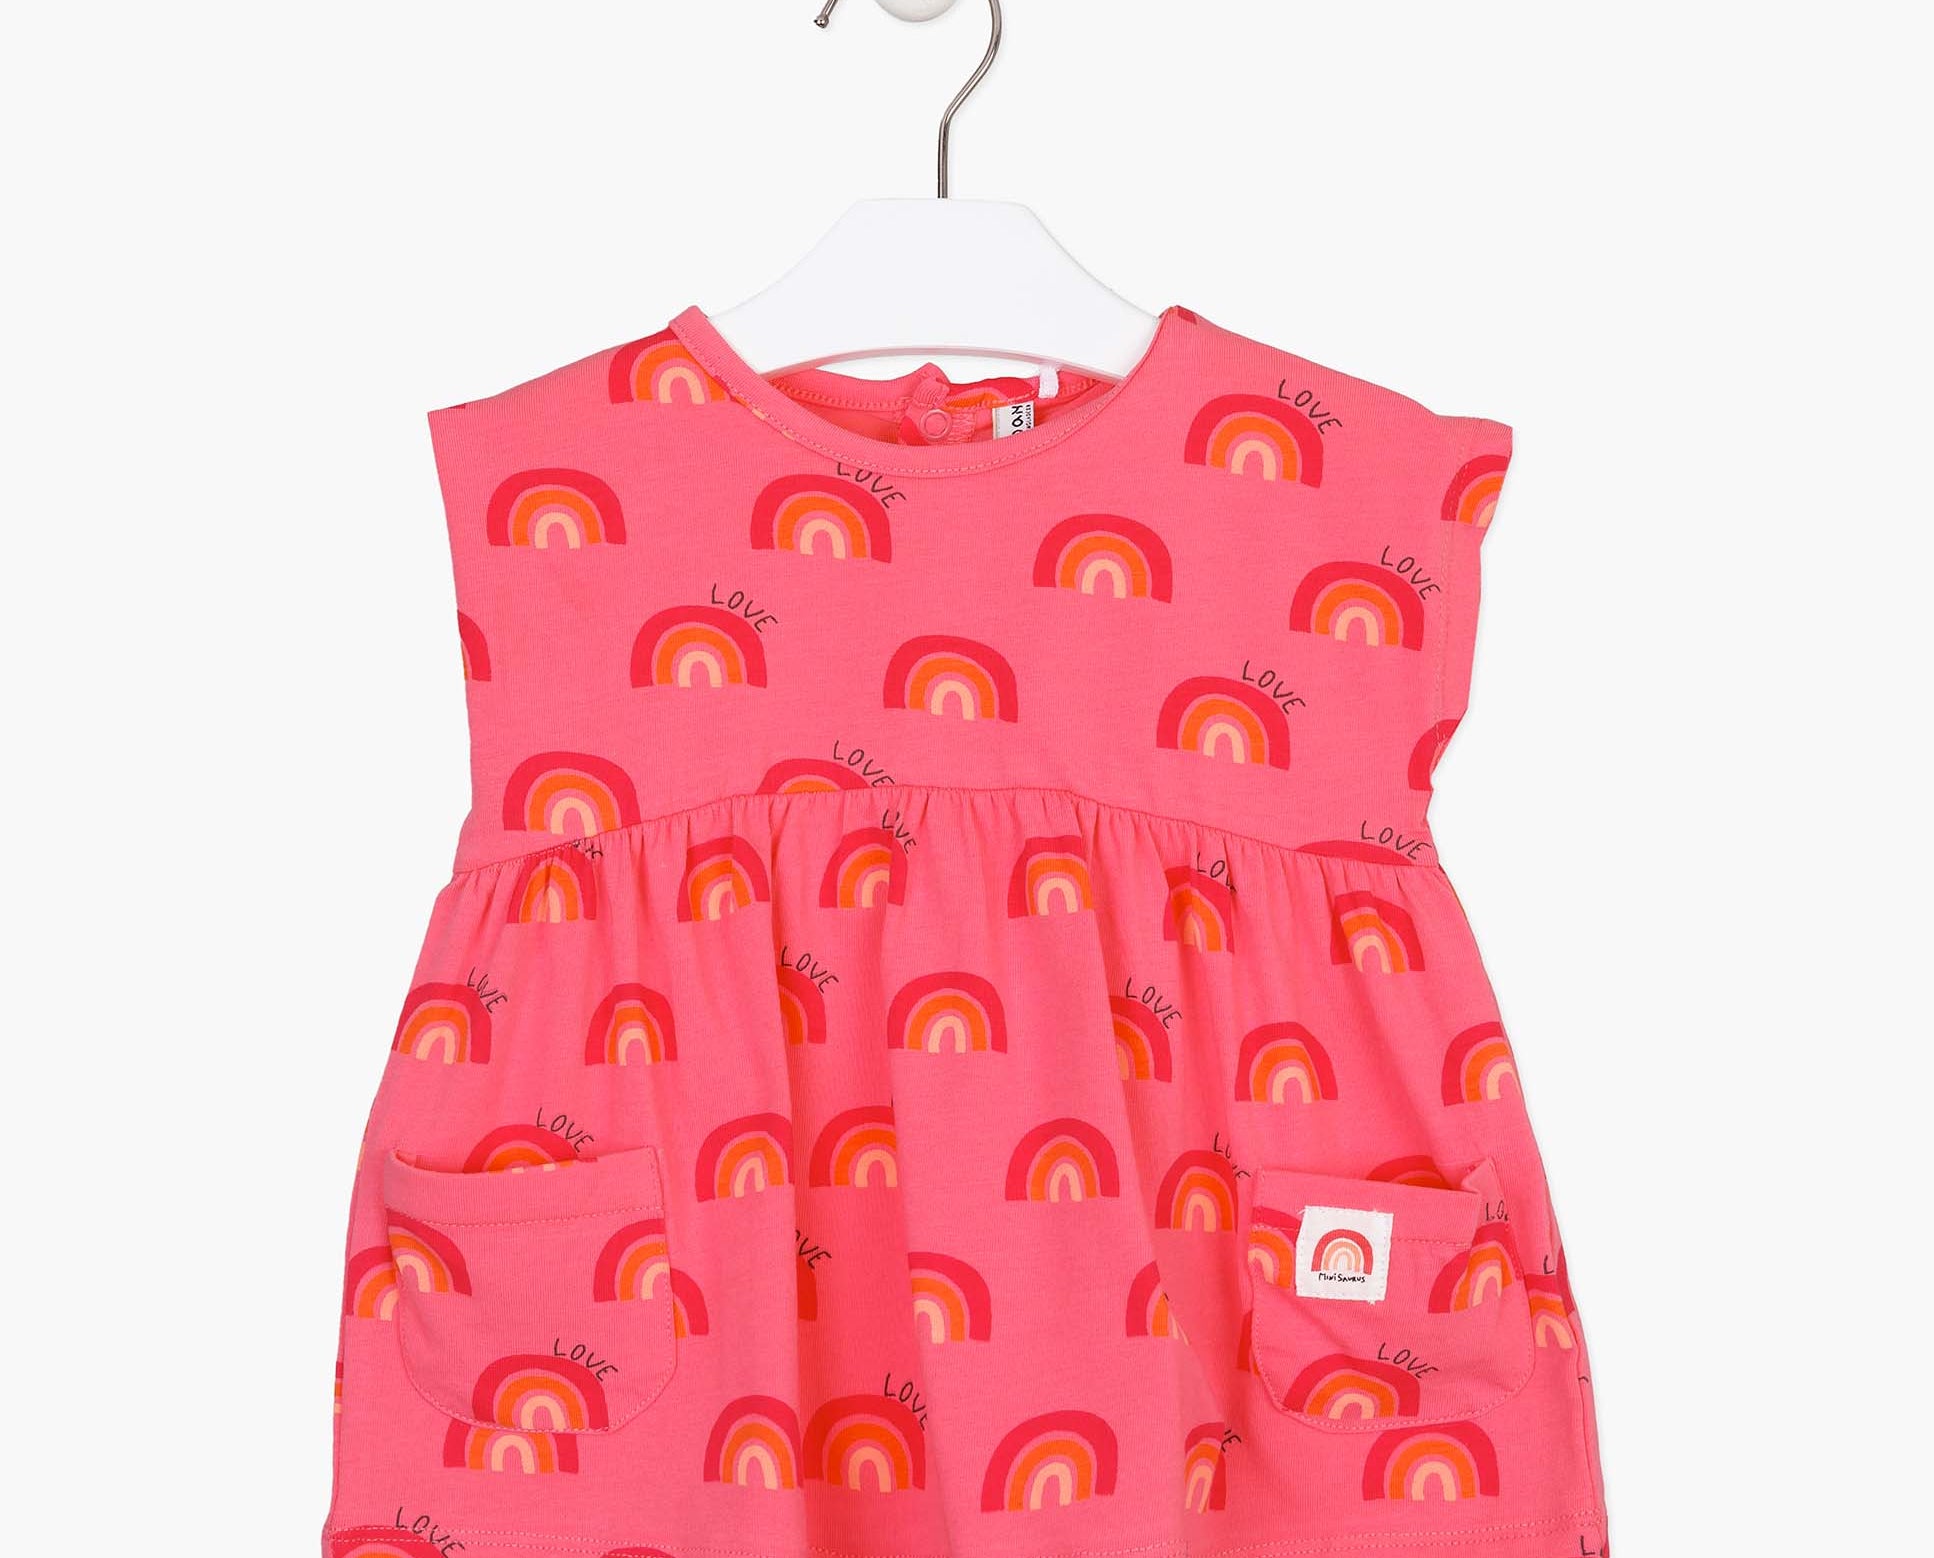 Losan pink sleeveless rainbow dress for baby girls with a round neckline, two pockets at the front and snap buttons for easy closure at the back